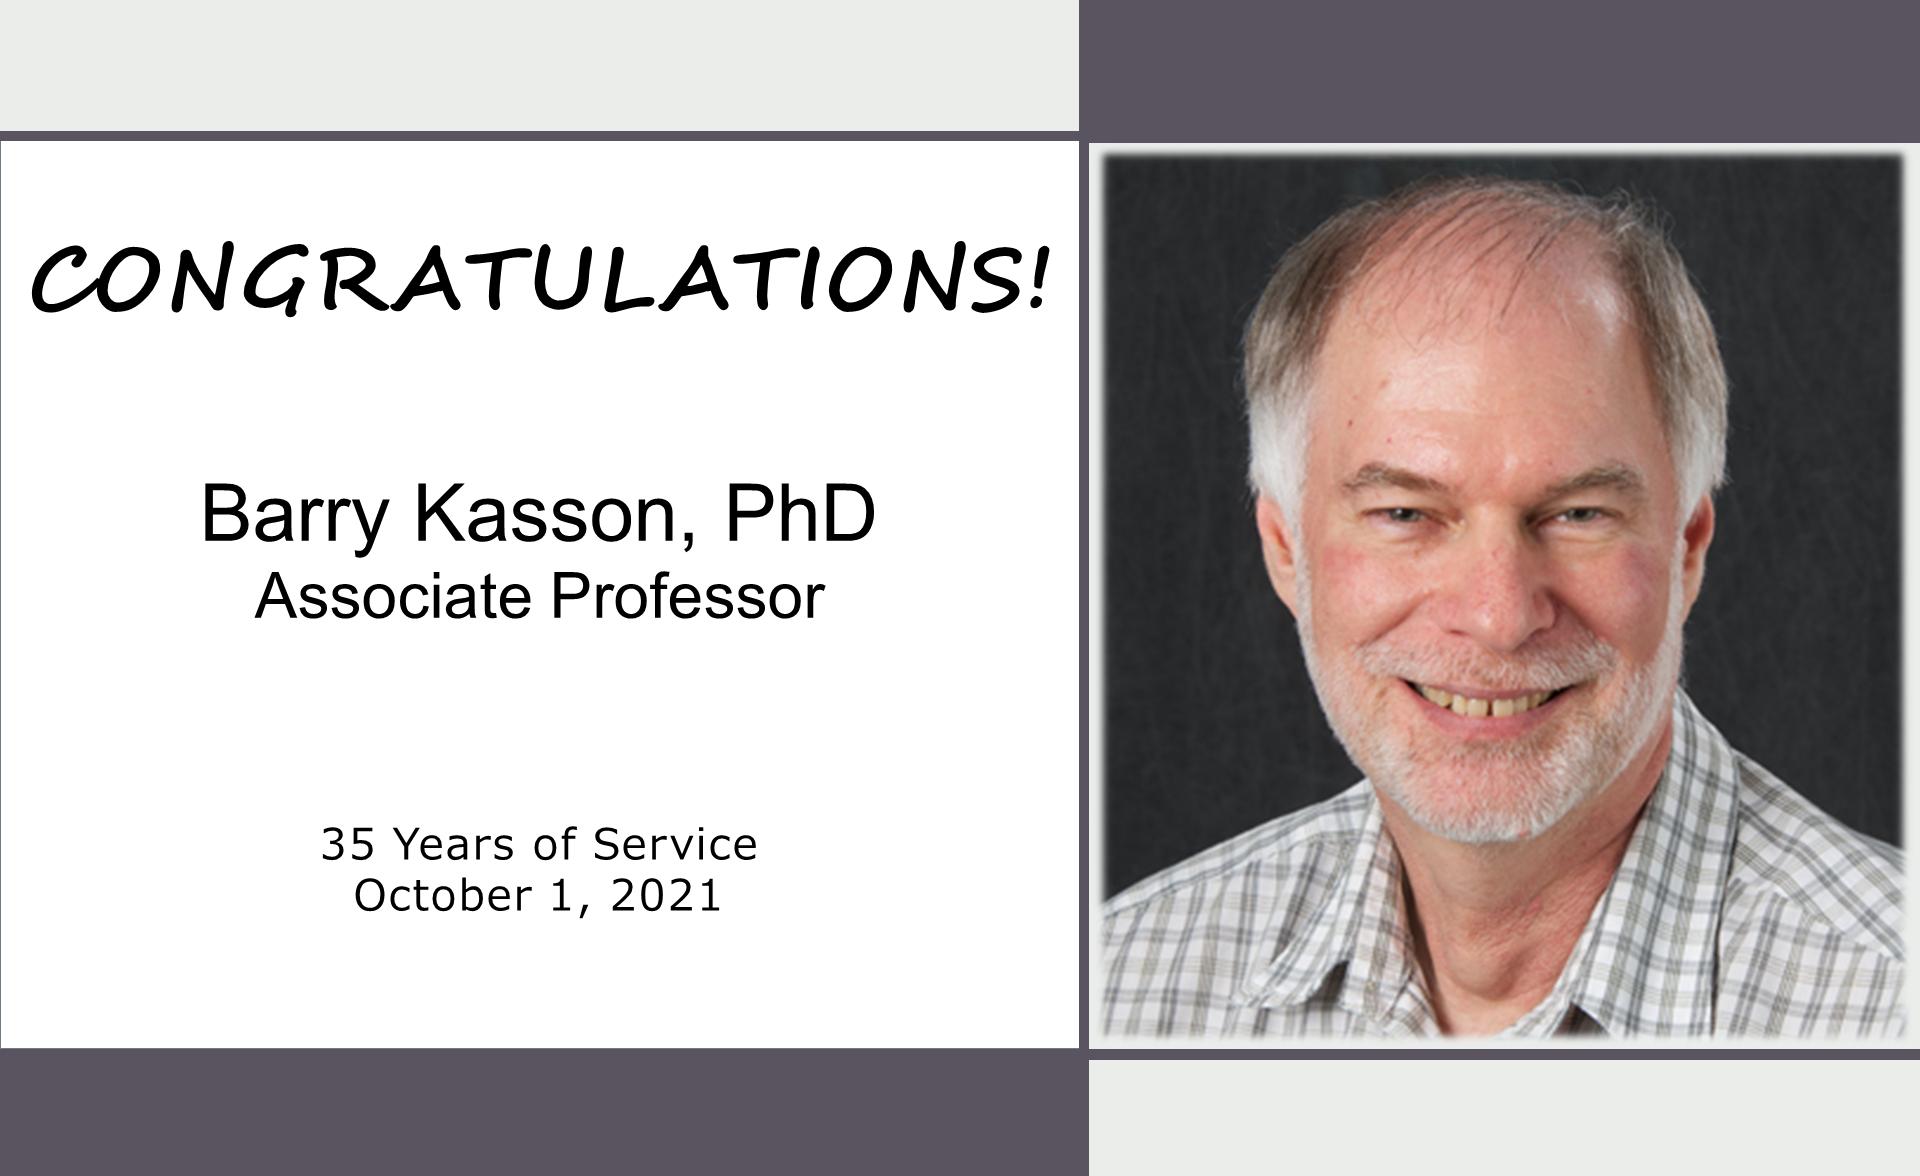 Kasson - 35 years of service - Oct 1, 2021